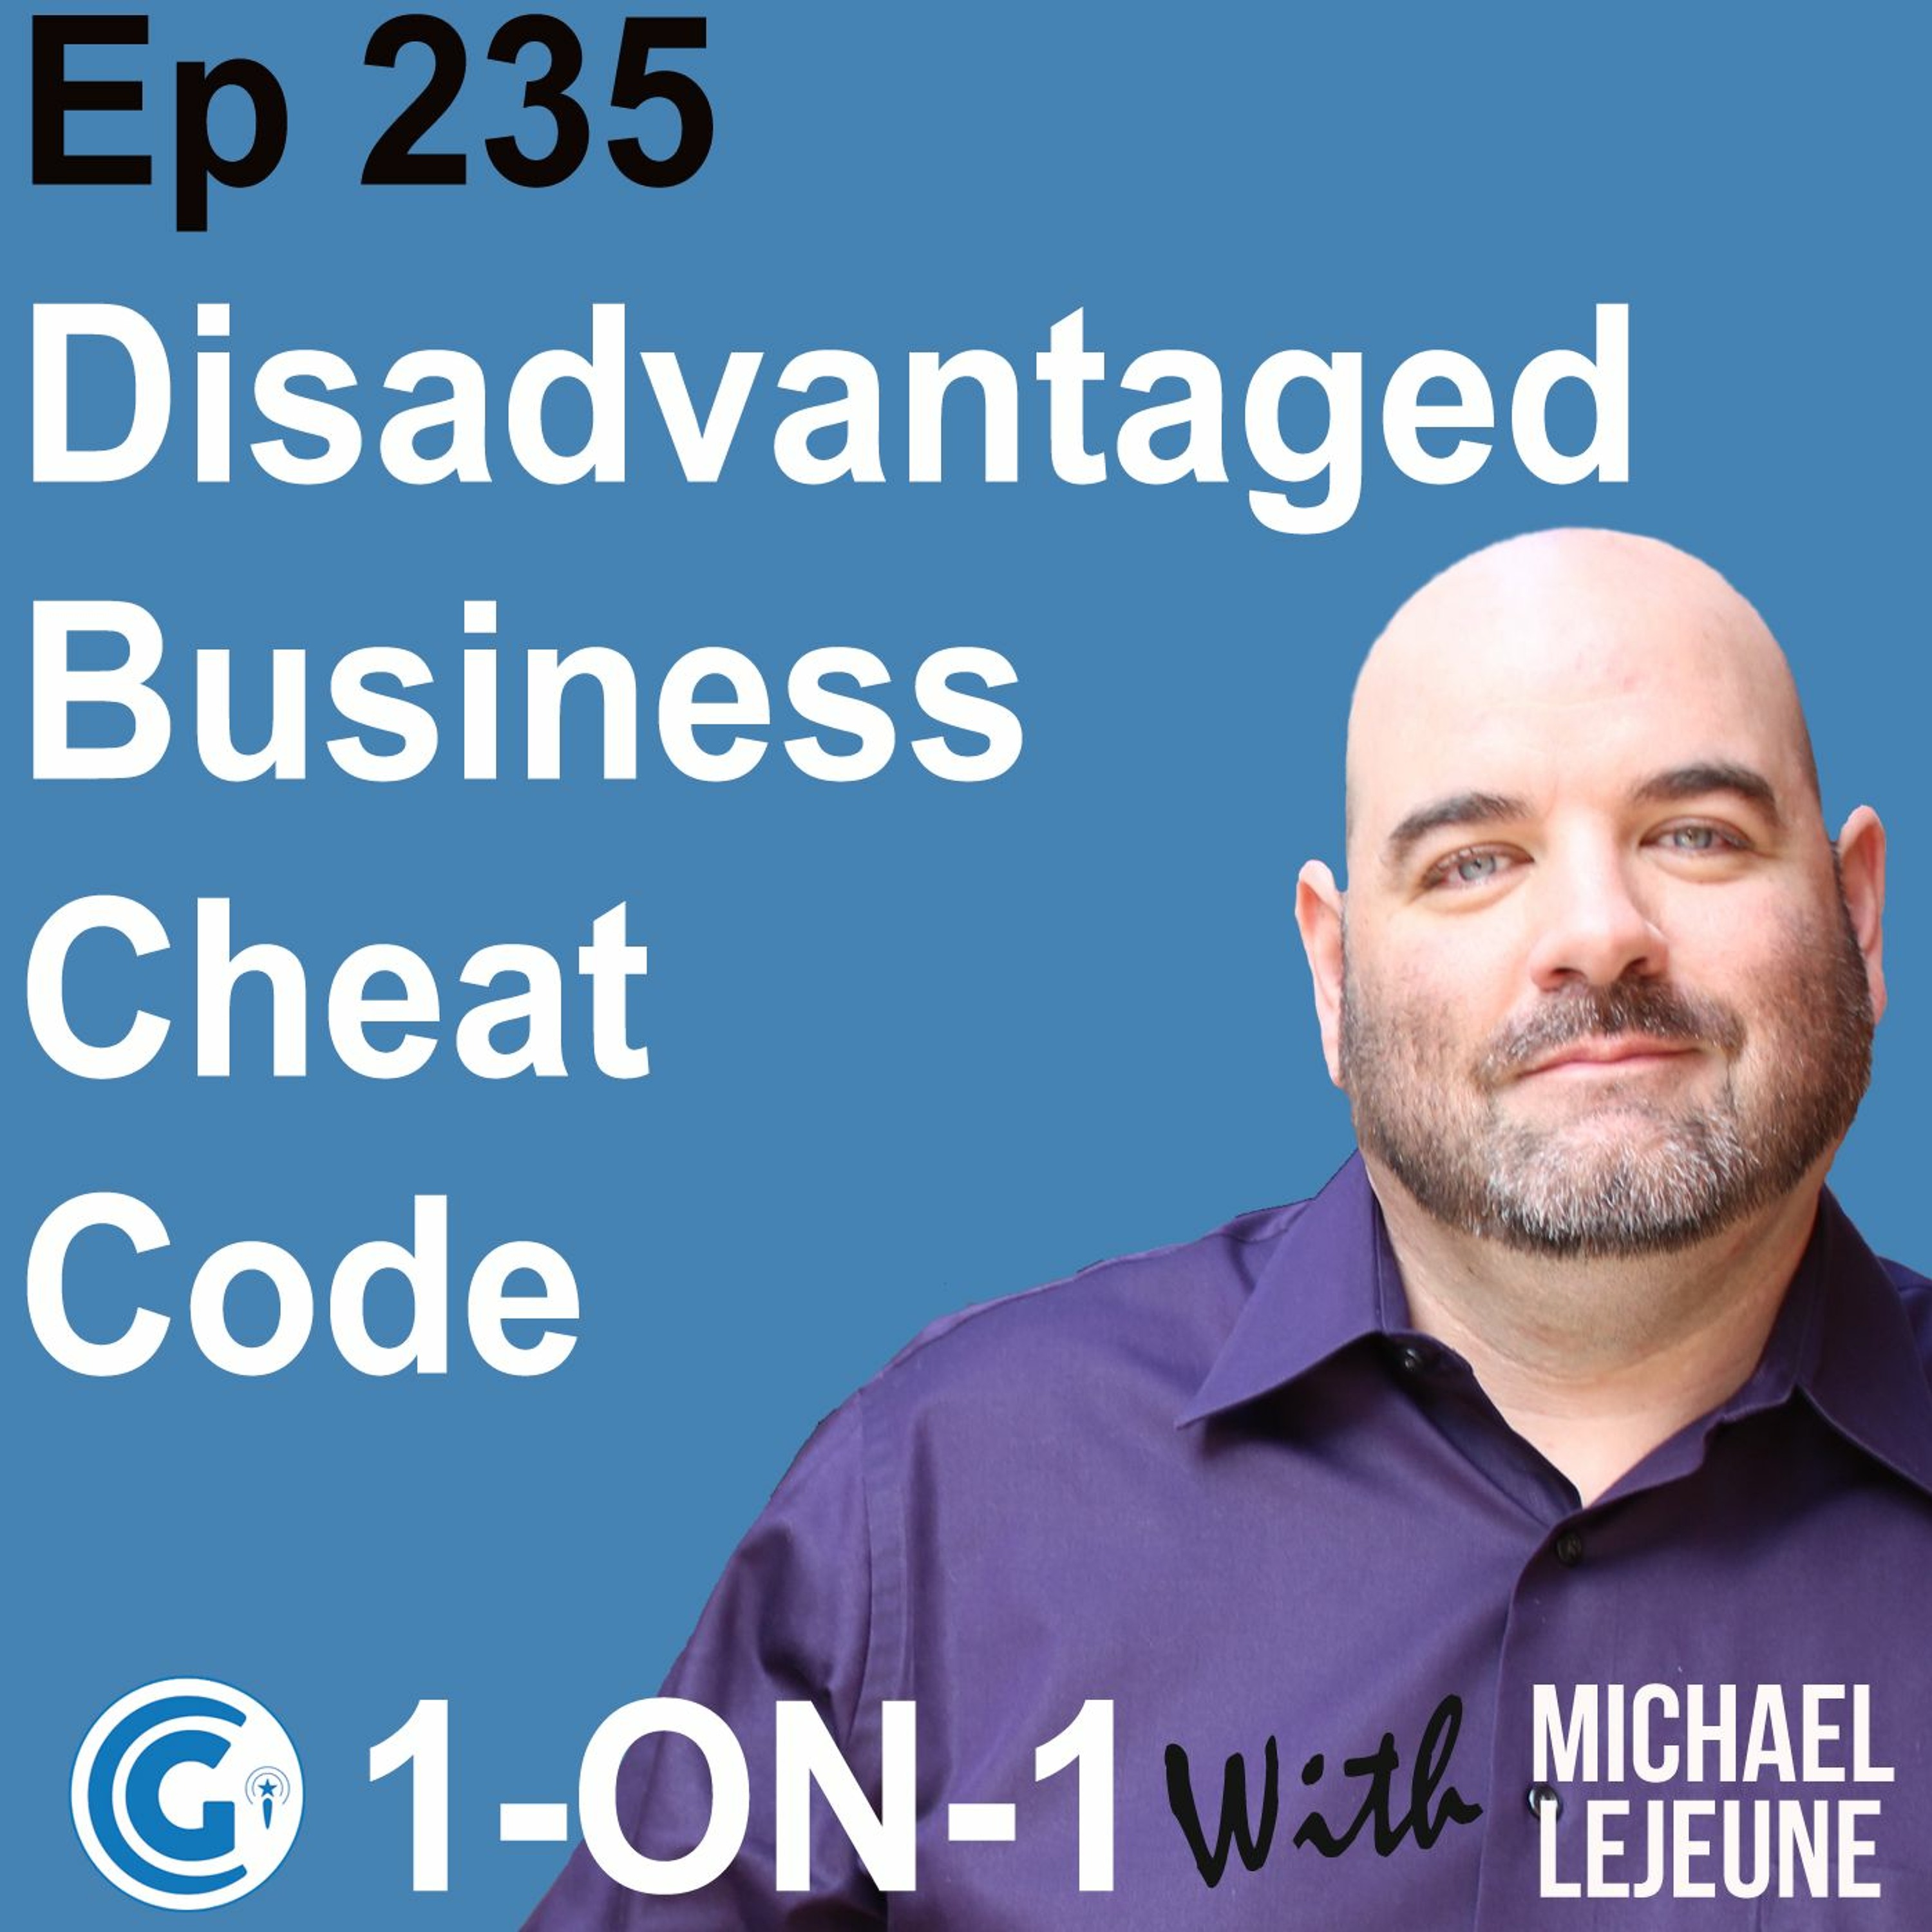 Ep 235 - The Disadvantaged Business Cheat Code for Government Contracts